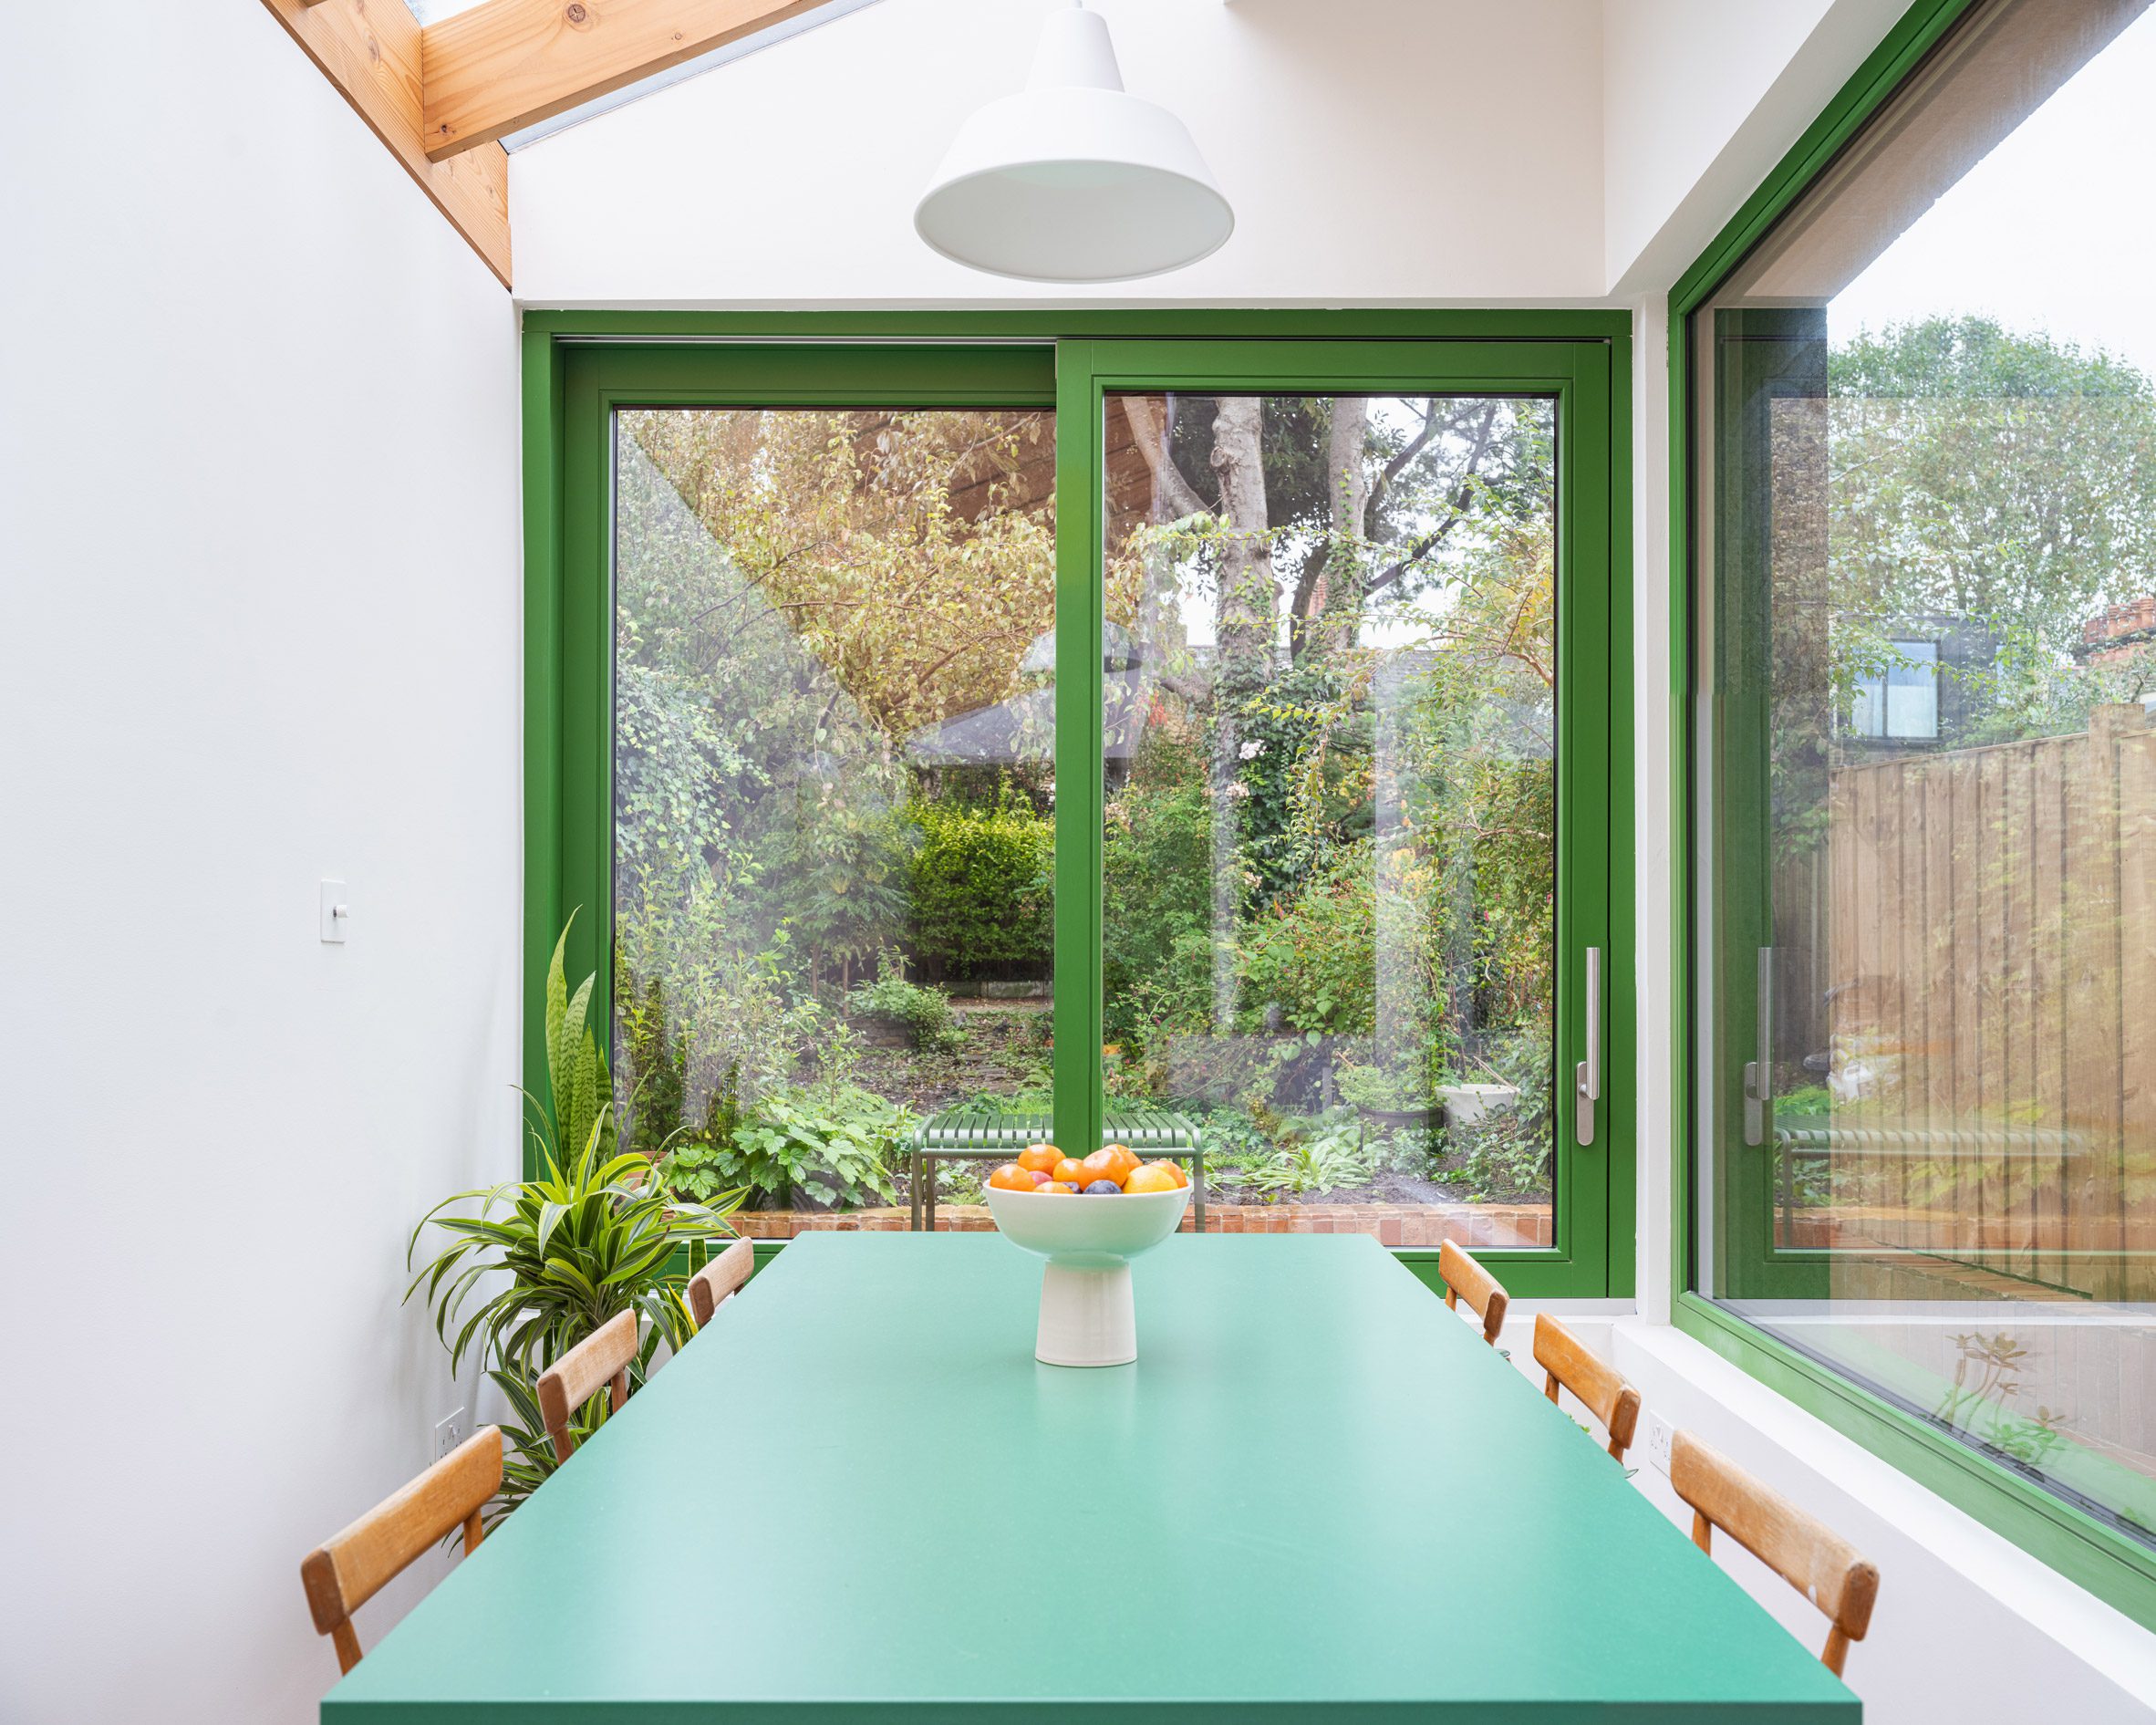 Dining area with green table and window frames